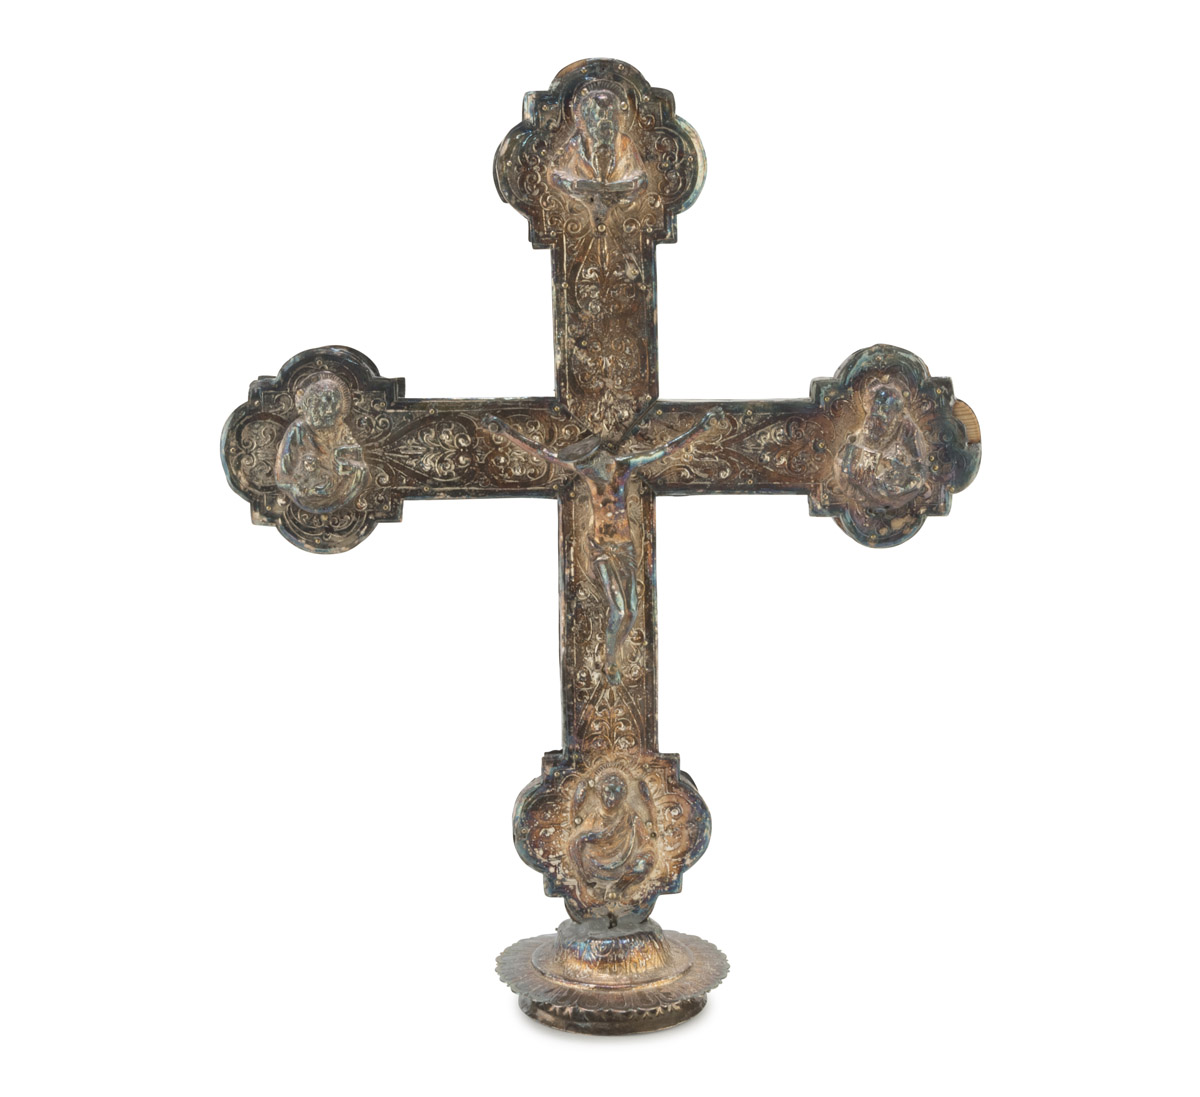 SILVER-PLATED PROCESSIIONAL CROSS, LATE 19TH CENTURY entirely embossed to apostles' figures at the